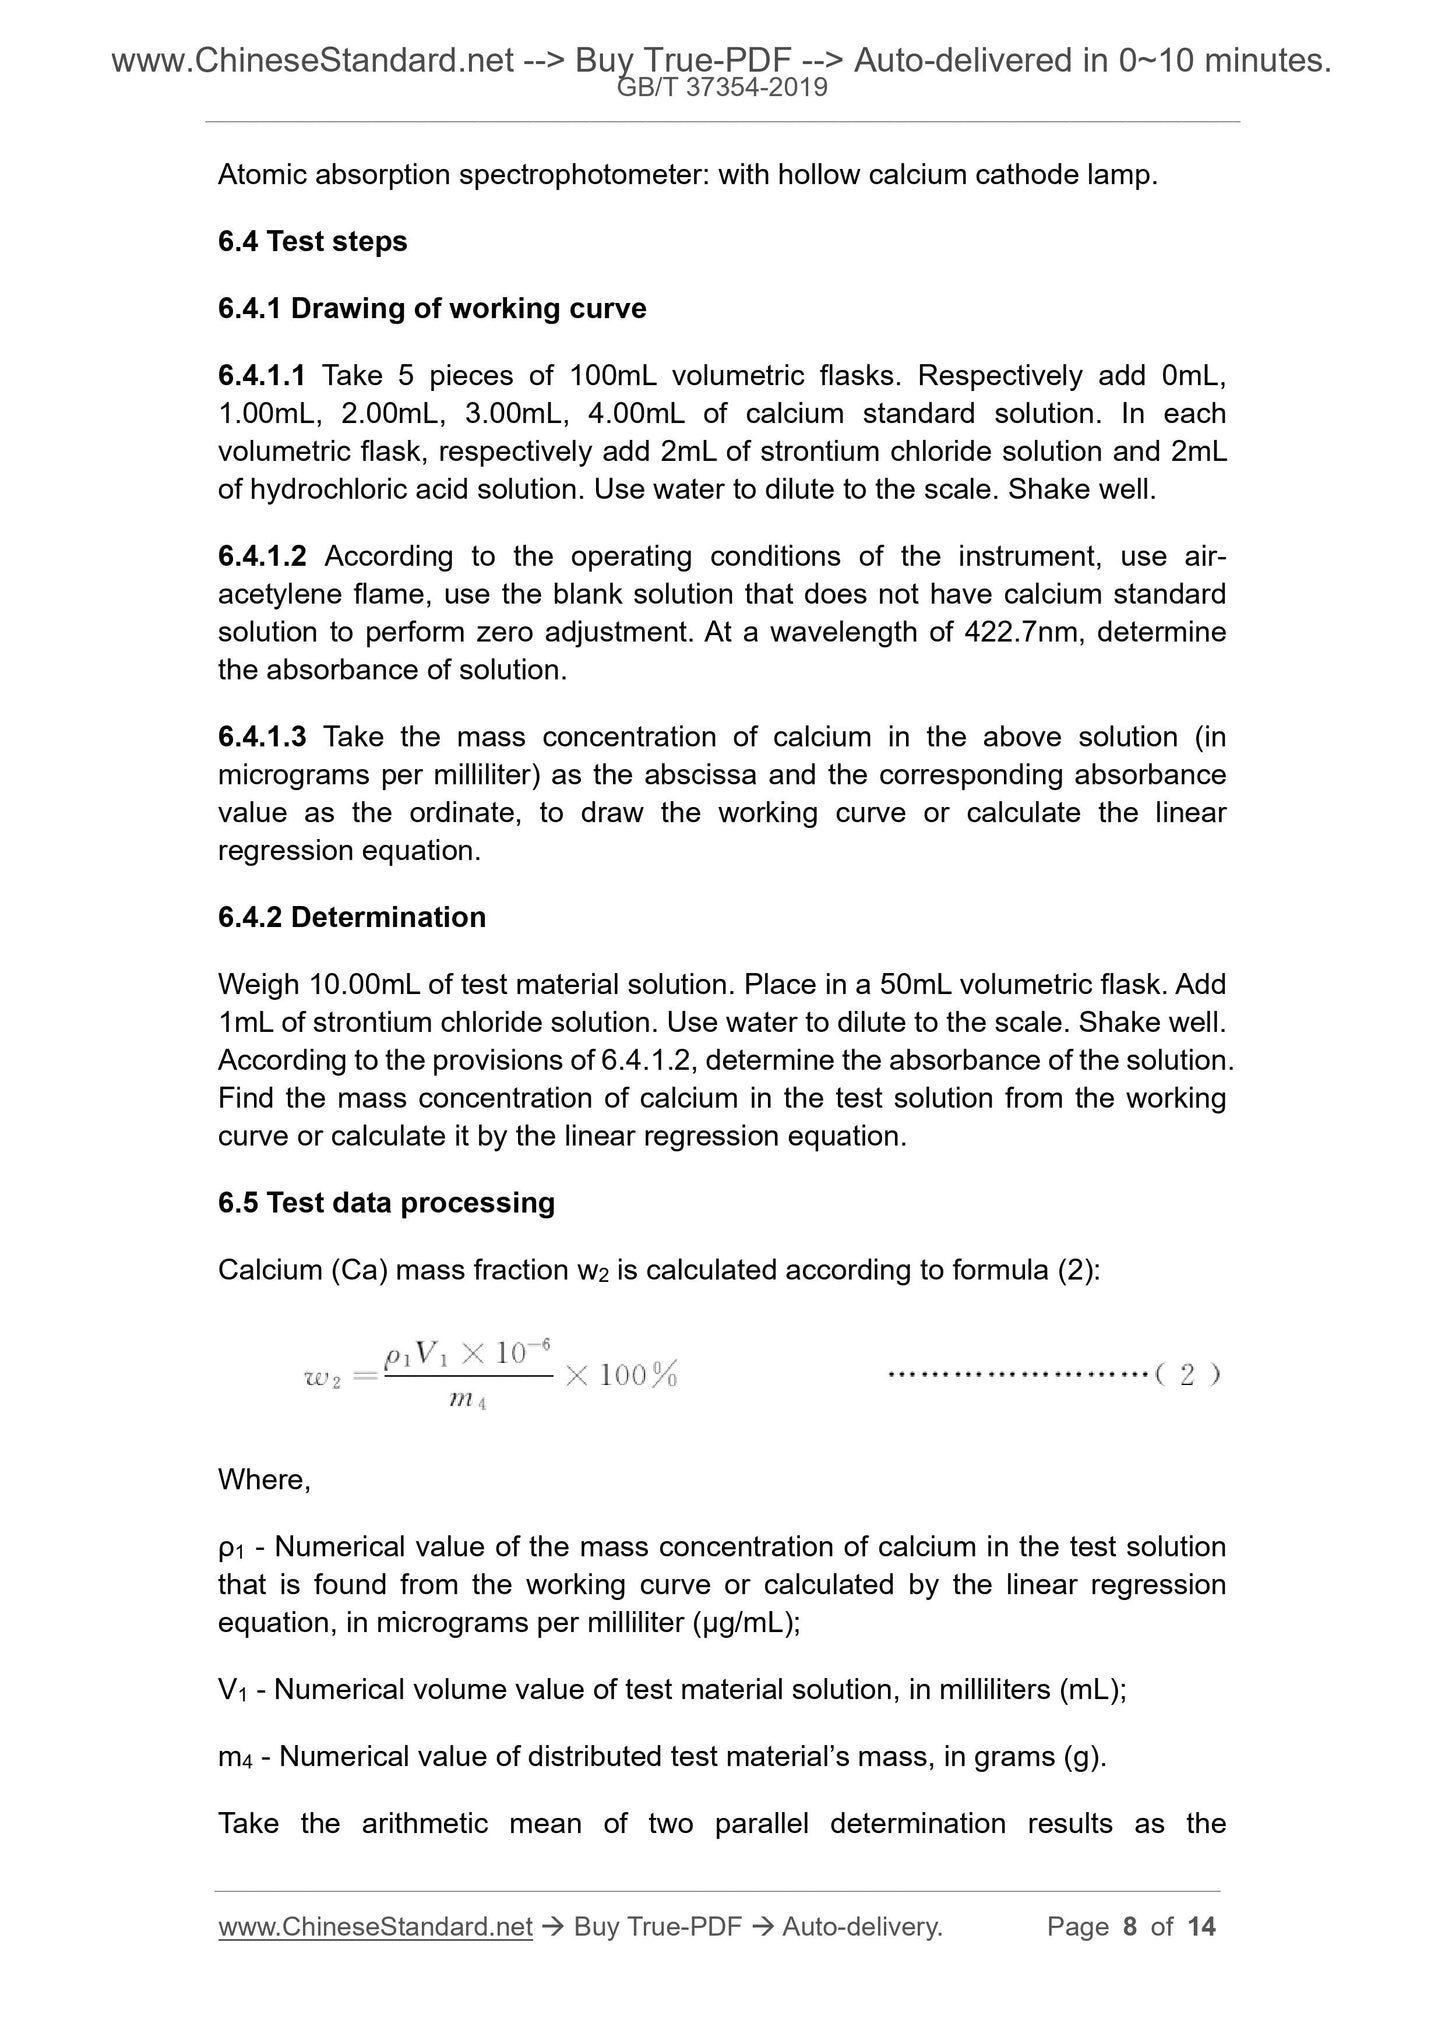 GB/T 37354-2019 Page 5